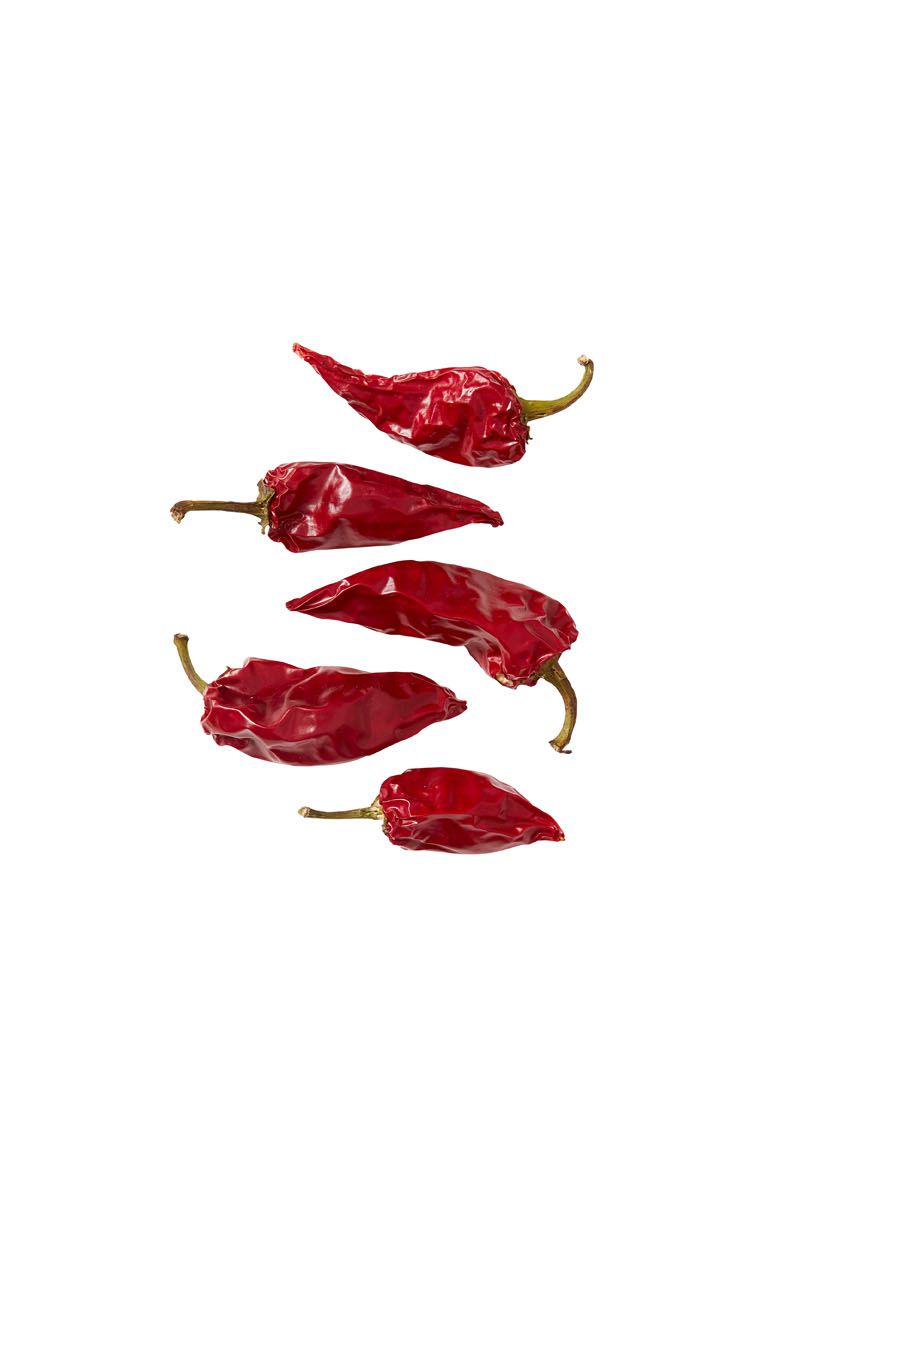 How to Dry Chile Peppers